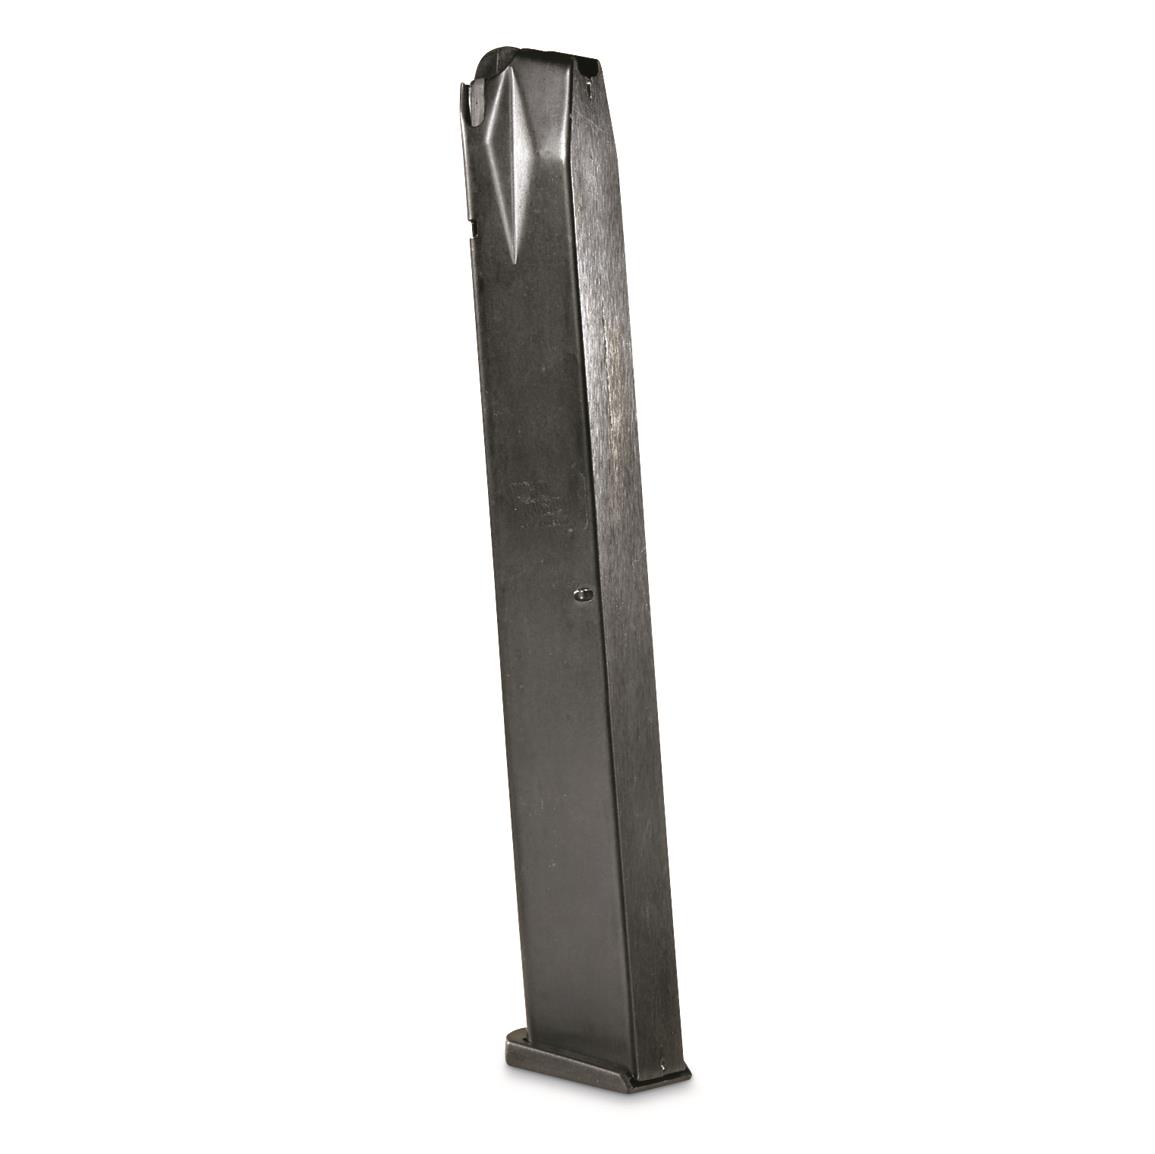 ProMag SIG SAUER P226 Magazine, 9mm, 32 Rounds, Blued Steel